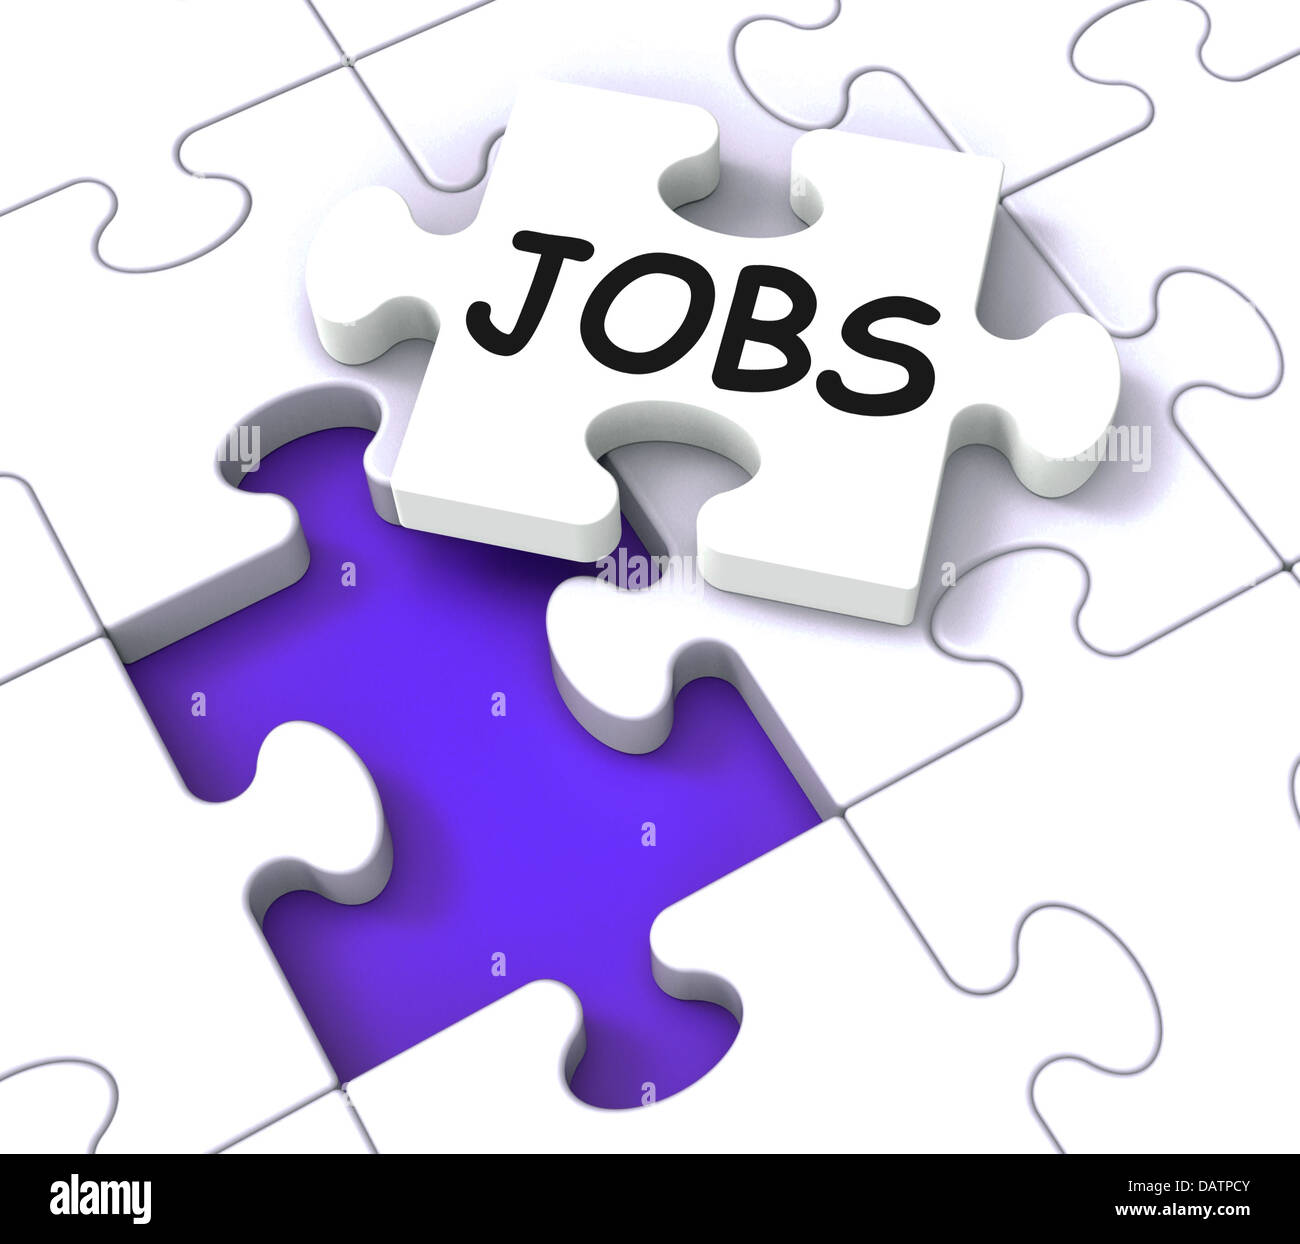 Jobs Puzzle Shows Vocational Guidance Stock Photo